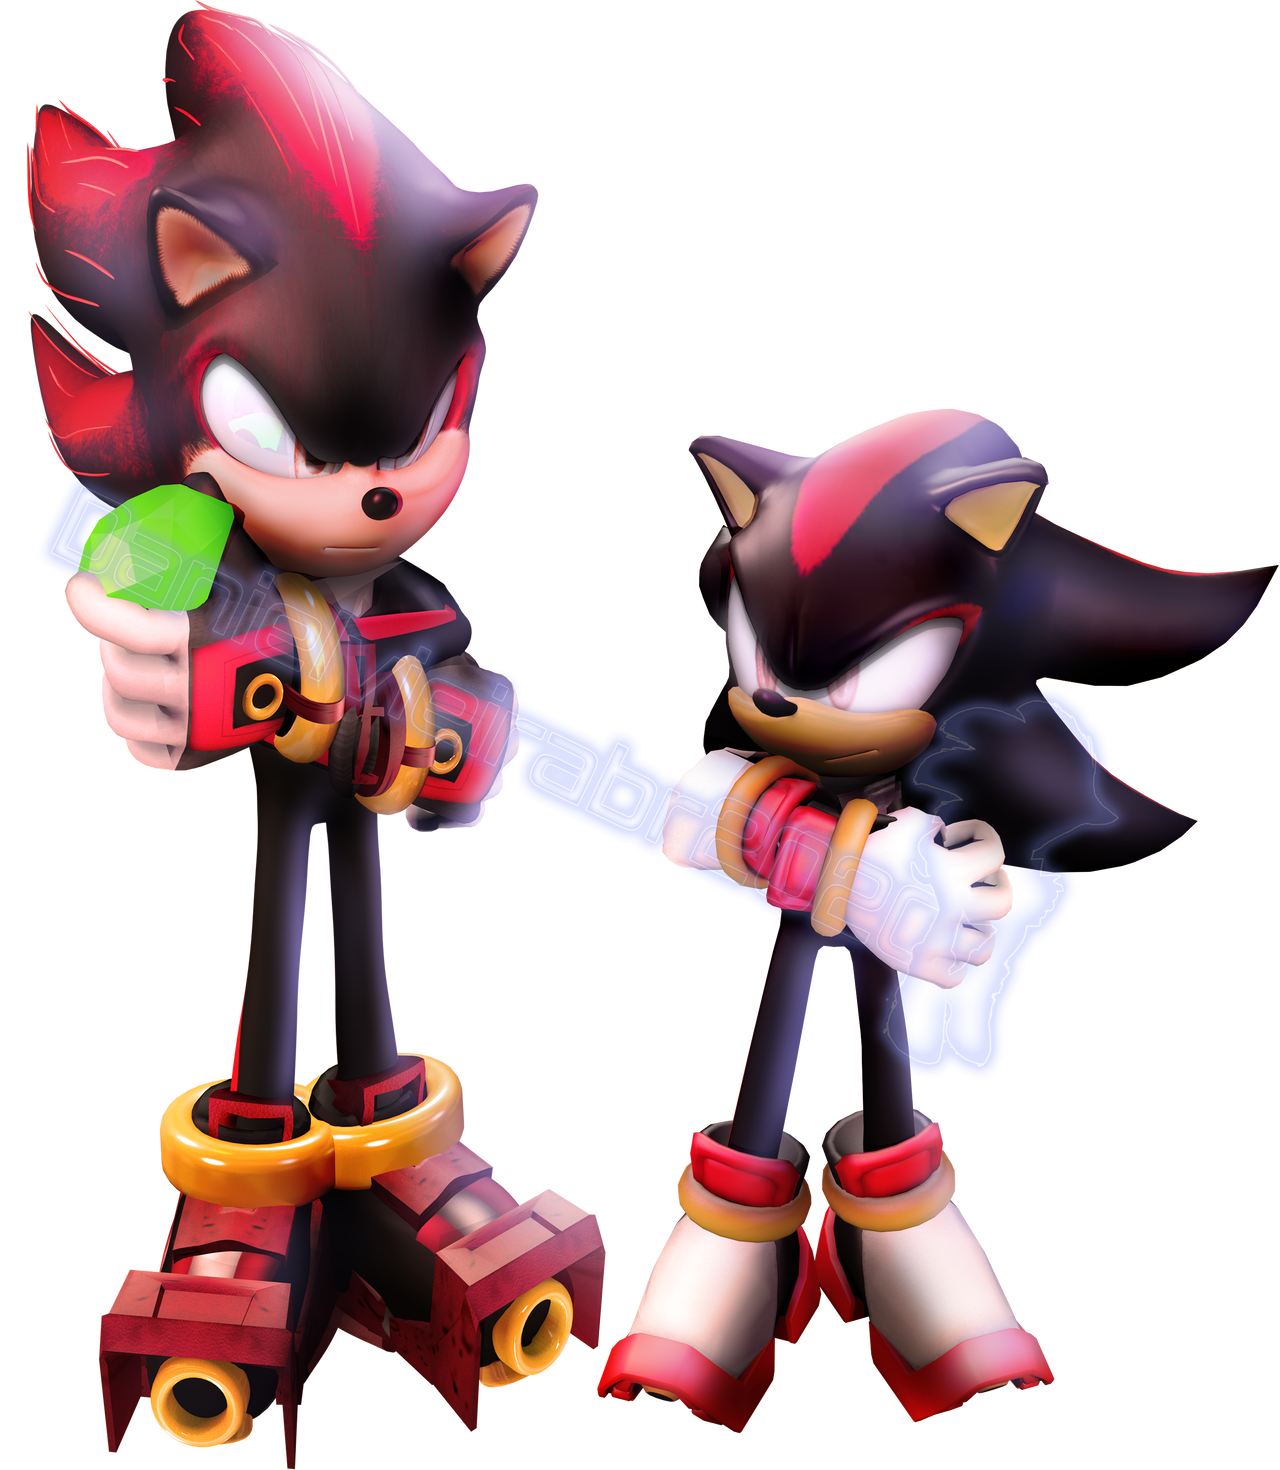 Shadow - Sonic Channel Oct 2020 Render Remake by Lamea132 on